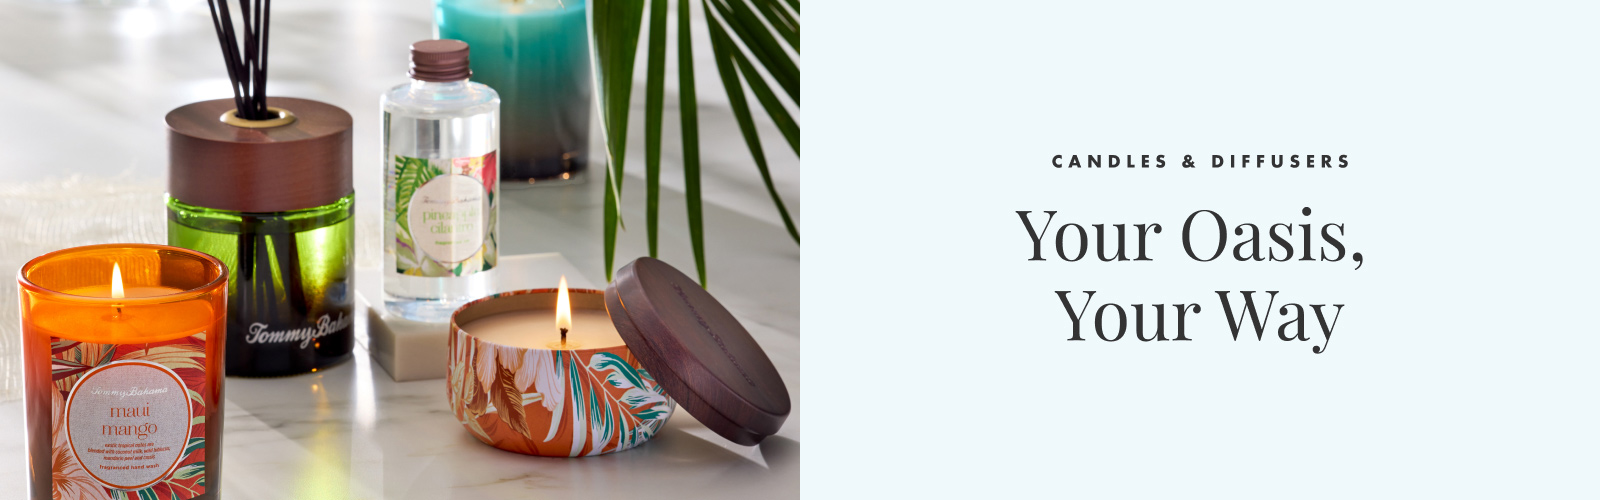 Candles & Diffusers: Your Oasis, Your Way